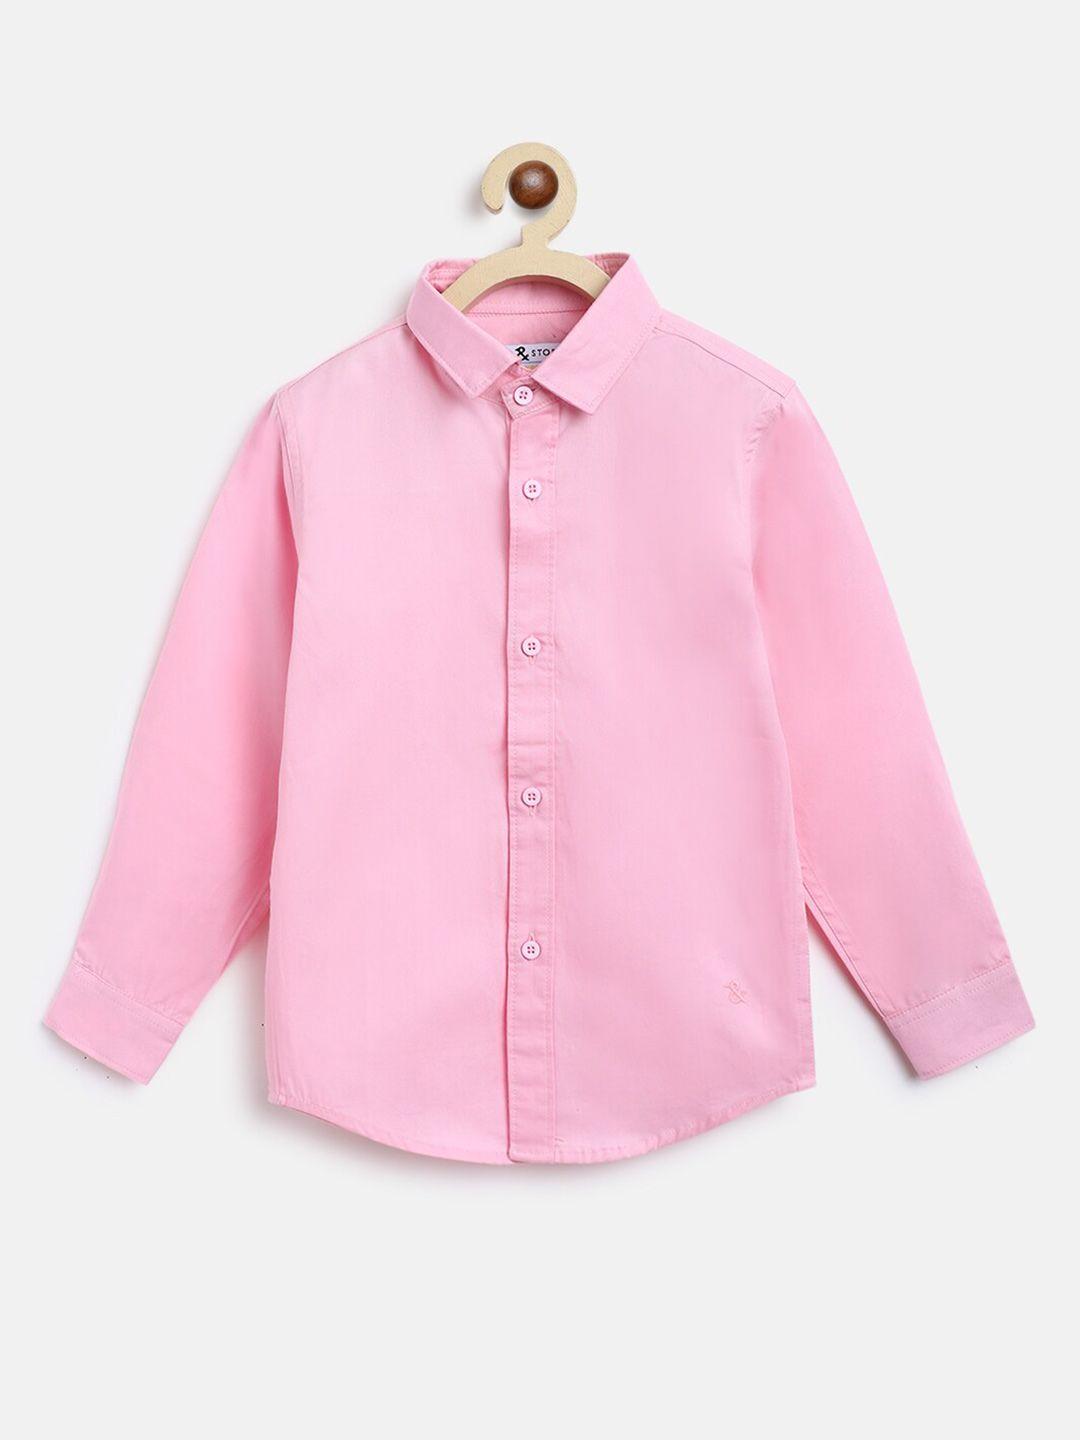 tales-&-stories-boys-pink-solid-casual-spread-collar-shirt